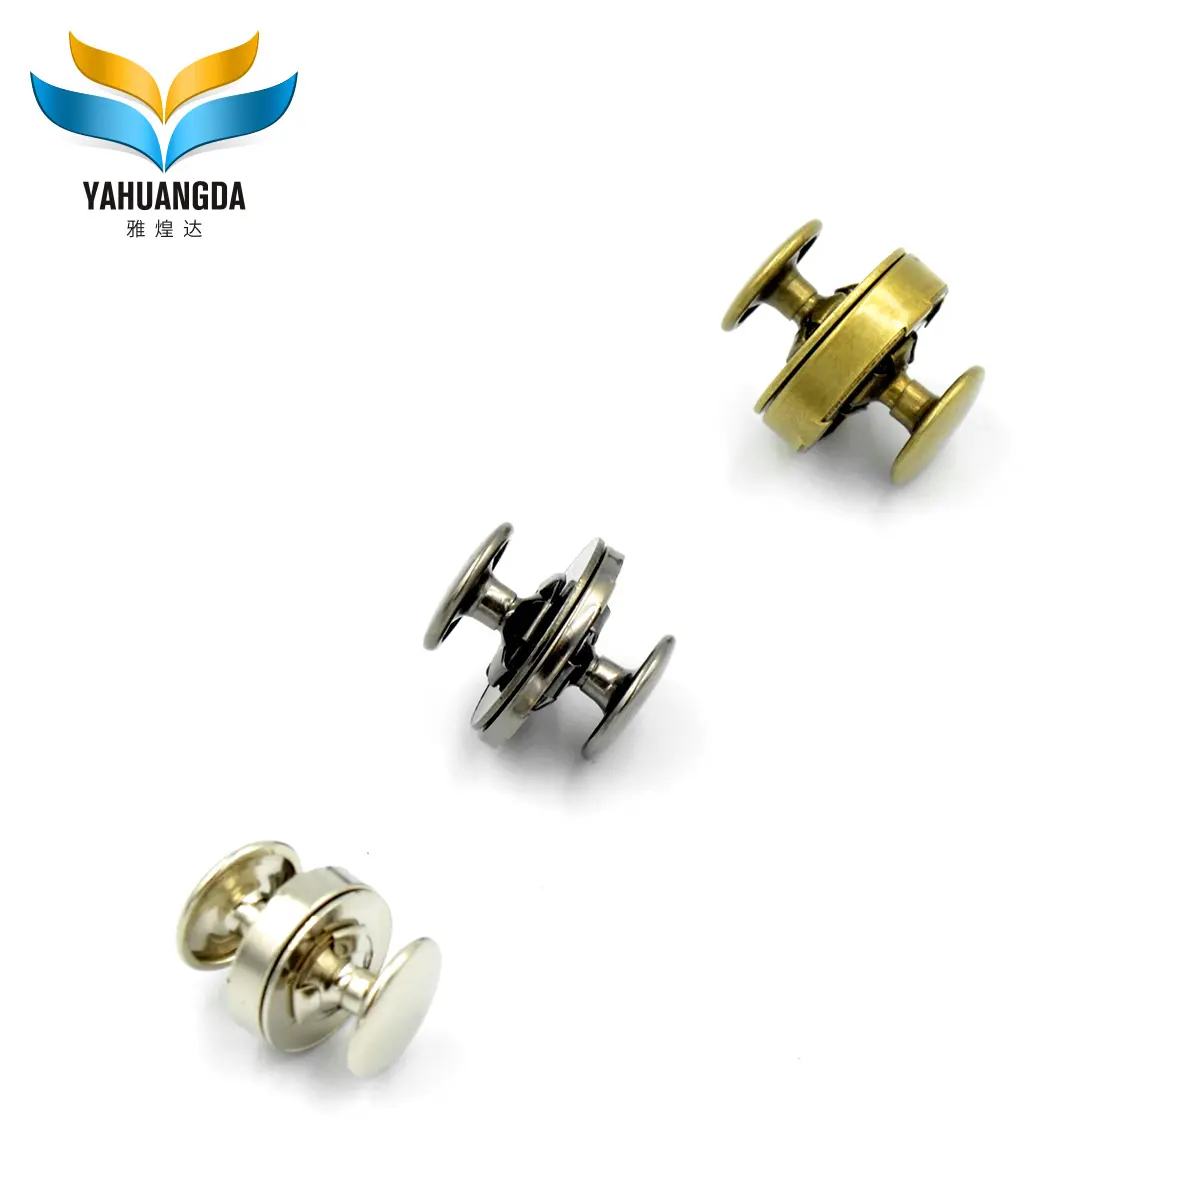 Factory price sale double rivets magnetic snap with 12mm rivet for handbag14*4mm 18*4mm 18*2mm